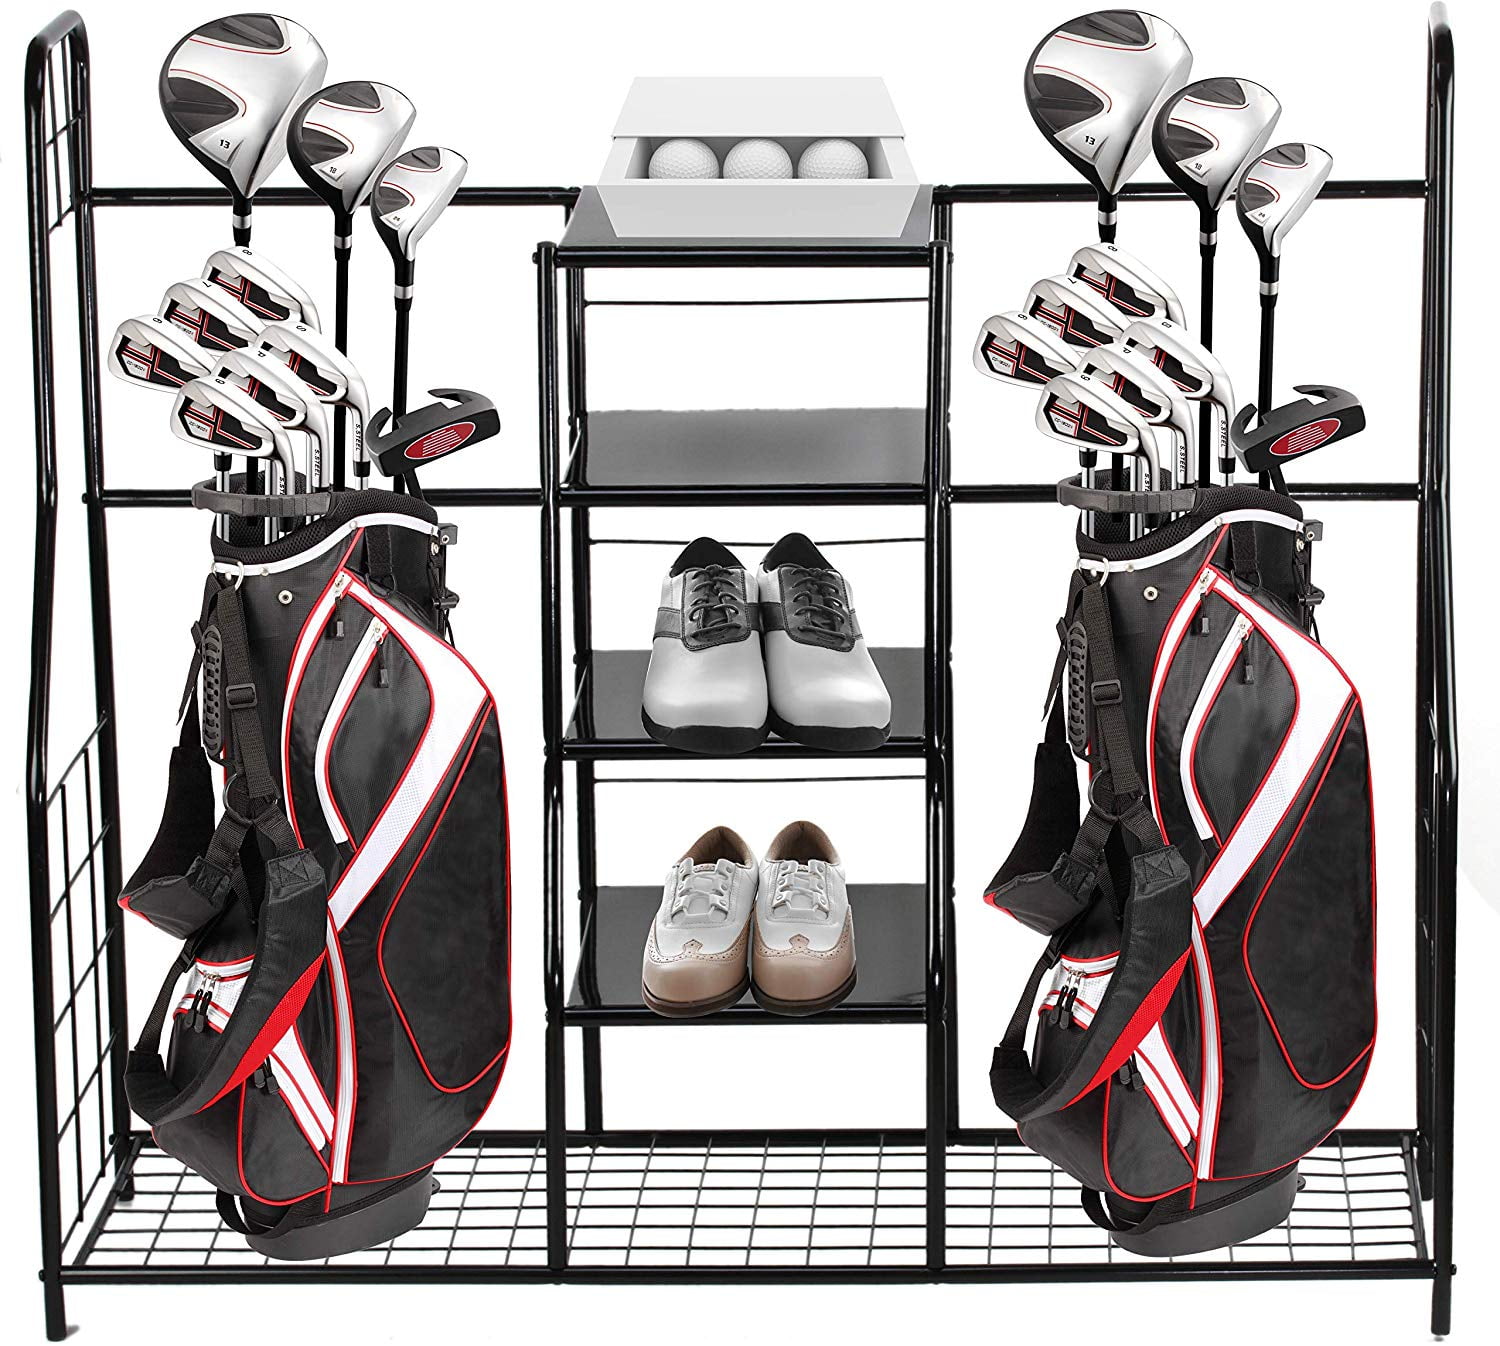 Golf Bag Organizer - Golf Equipment Organizer - Sports Dual Golf Storage  Organizer for Sports Gear and Accessories - Holds up to Two Golf Bags